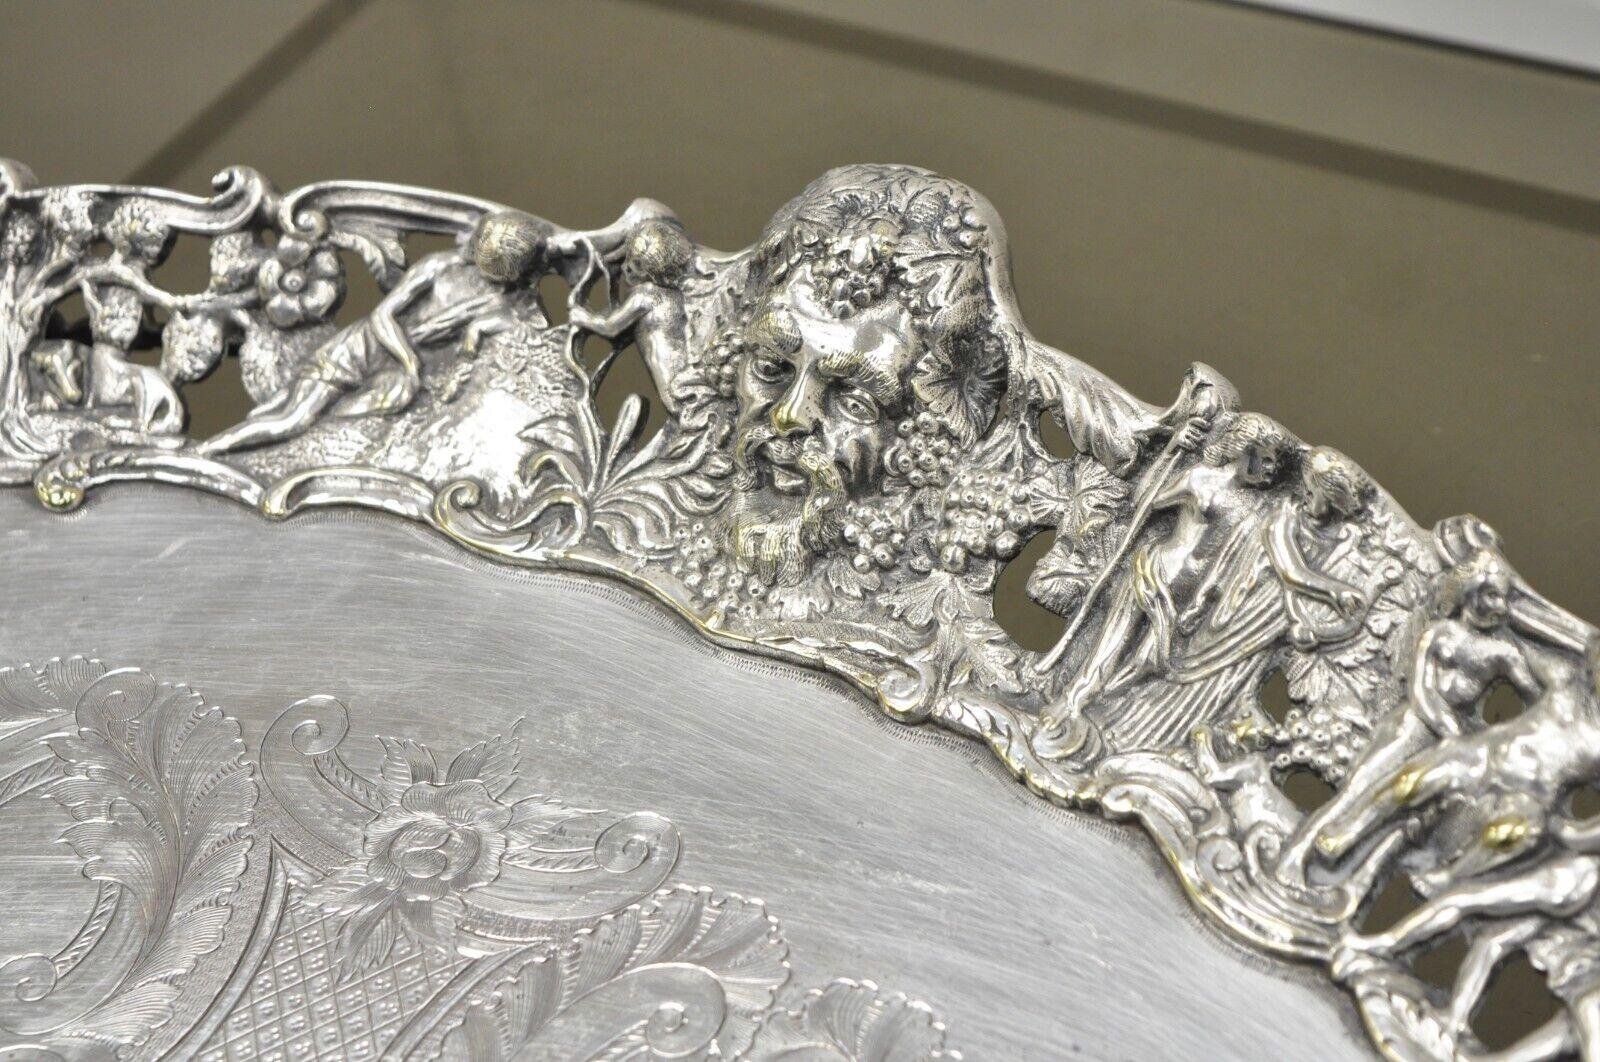 Antique French Renaissance Bacchanal Scene Silver Plated Bacchus Figural English Oval Salver Tray. Item features ornate cast frieze border of Bacchus, female mask heads, and classical mythological figures on stylized dolphin form legs. Tray further